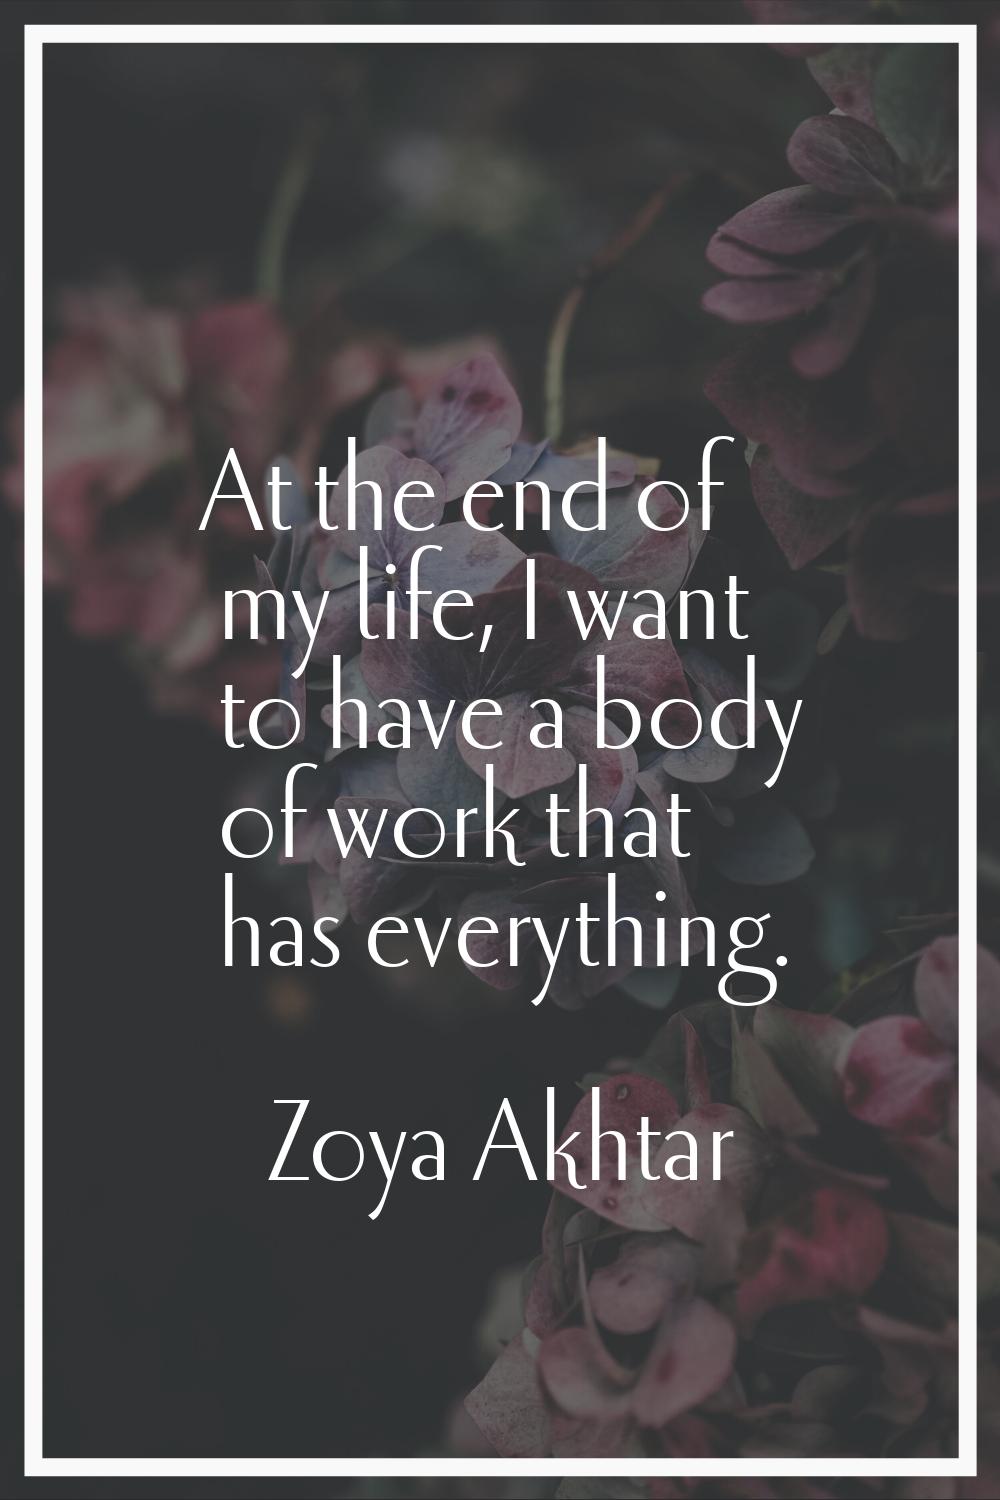 At the end of my life, I want to have a body of work that has everything.